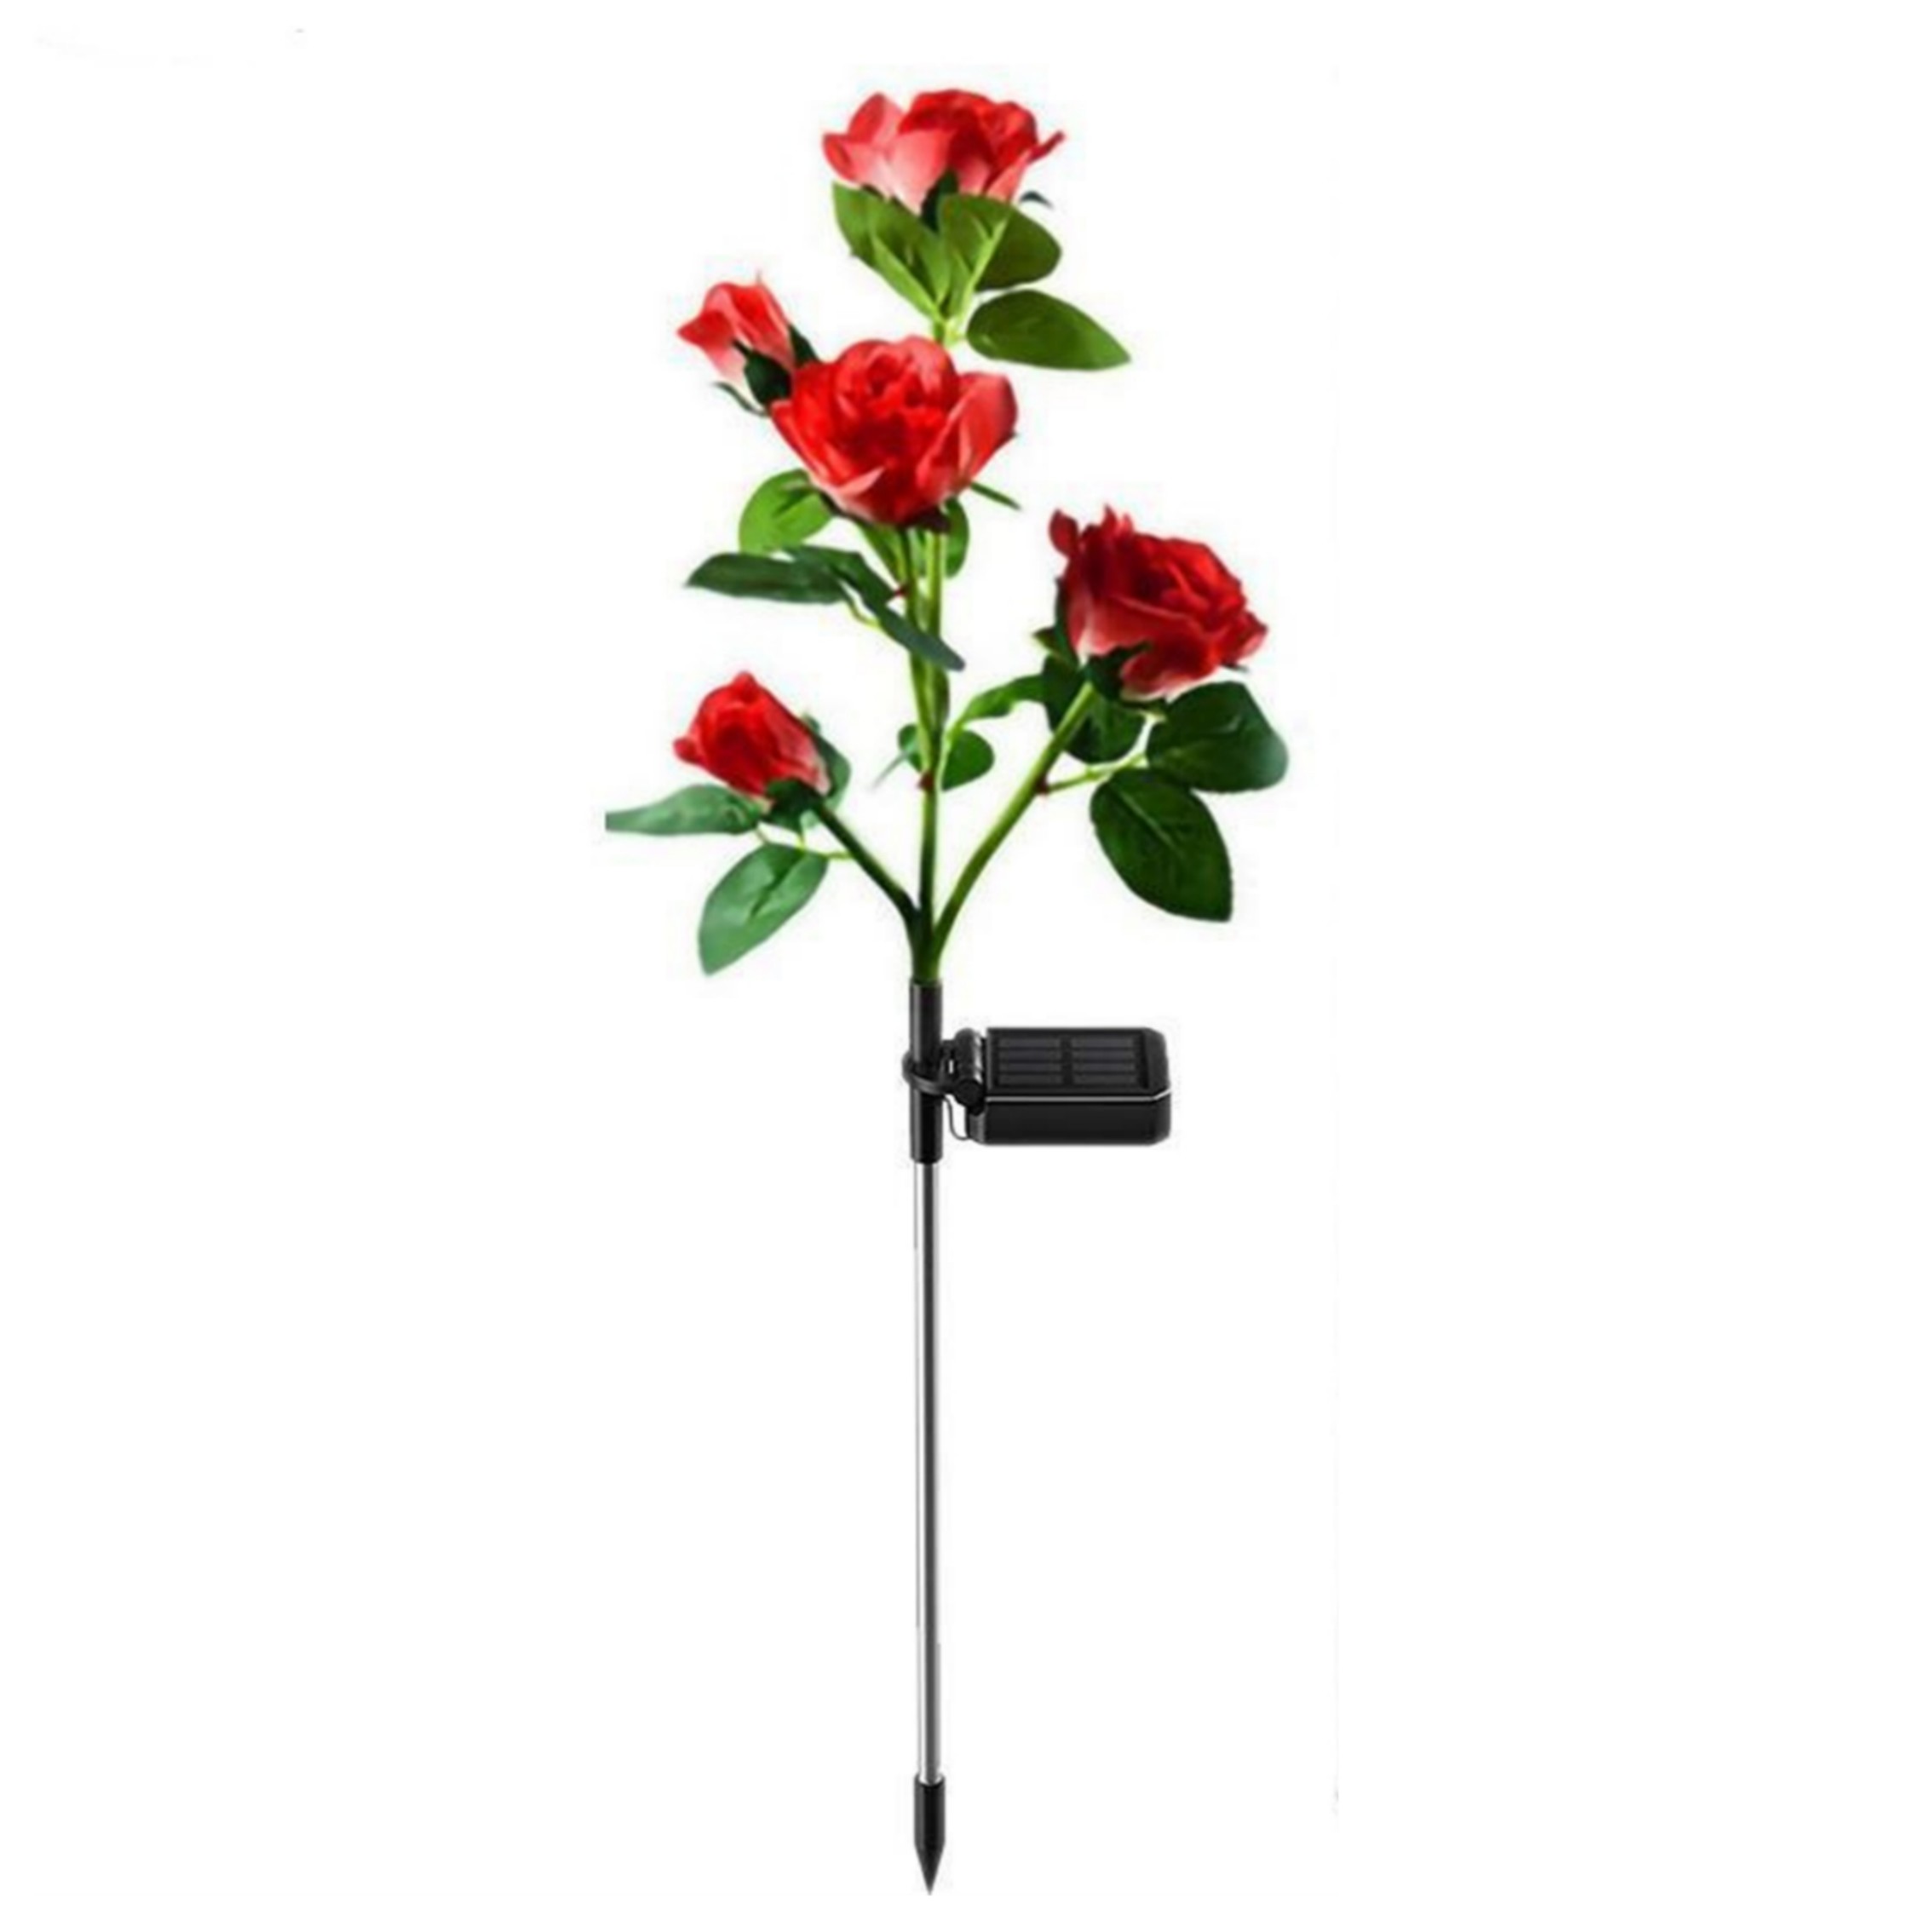 Solar 5 Heads Rose Lamp Outdoor Waterproof Simulation Rose Flower Lawn Decorative Lamp For Garden Yard Patio Decoration